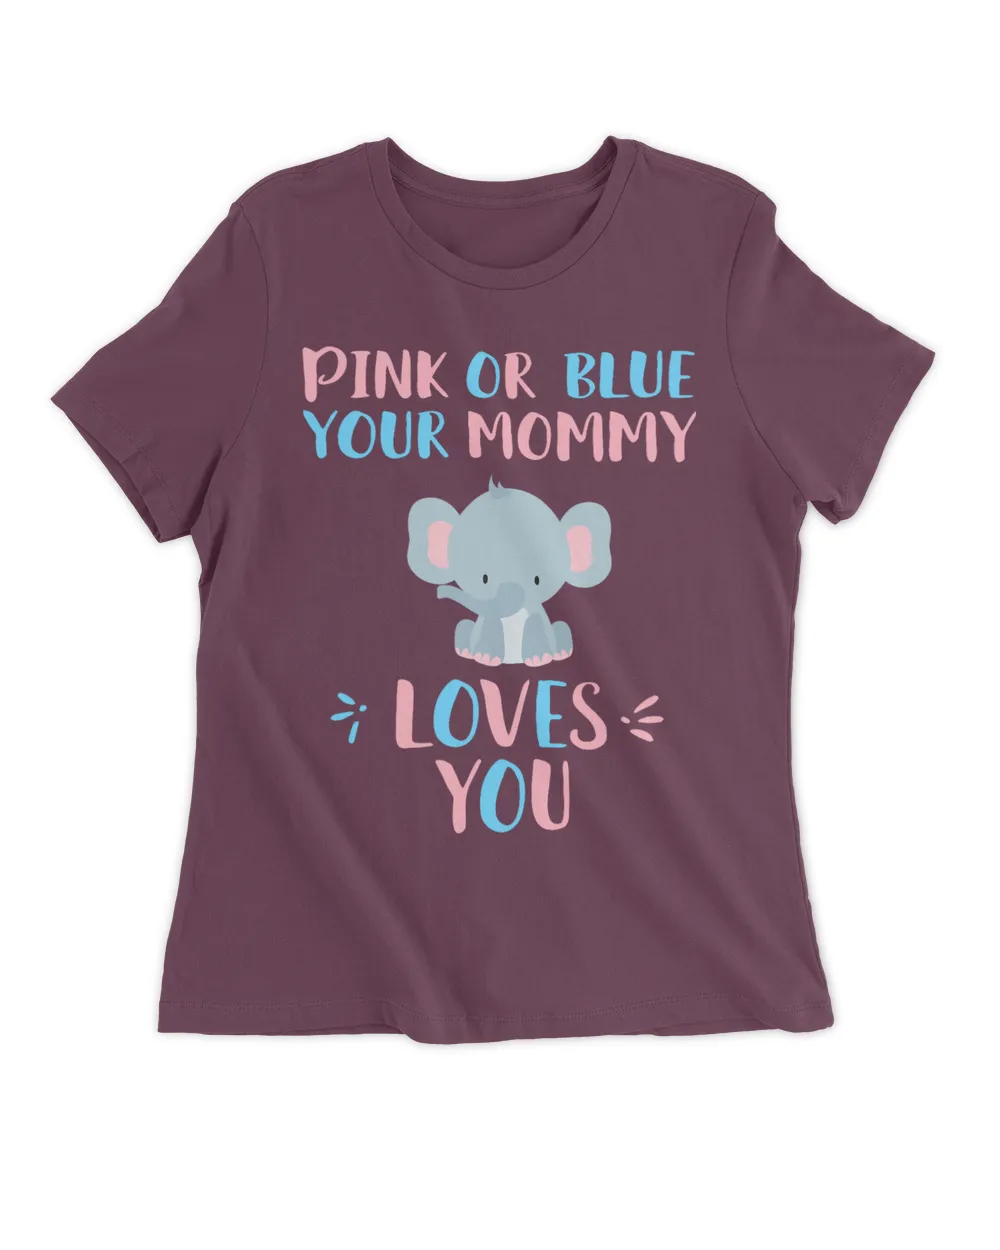 Cute Pink or Blue your mommy loves you with baby elephant